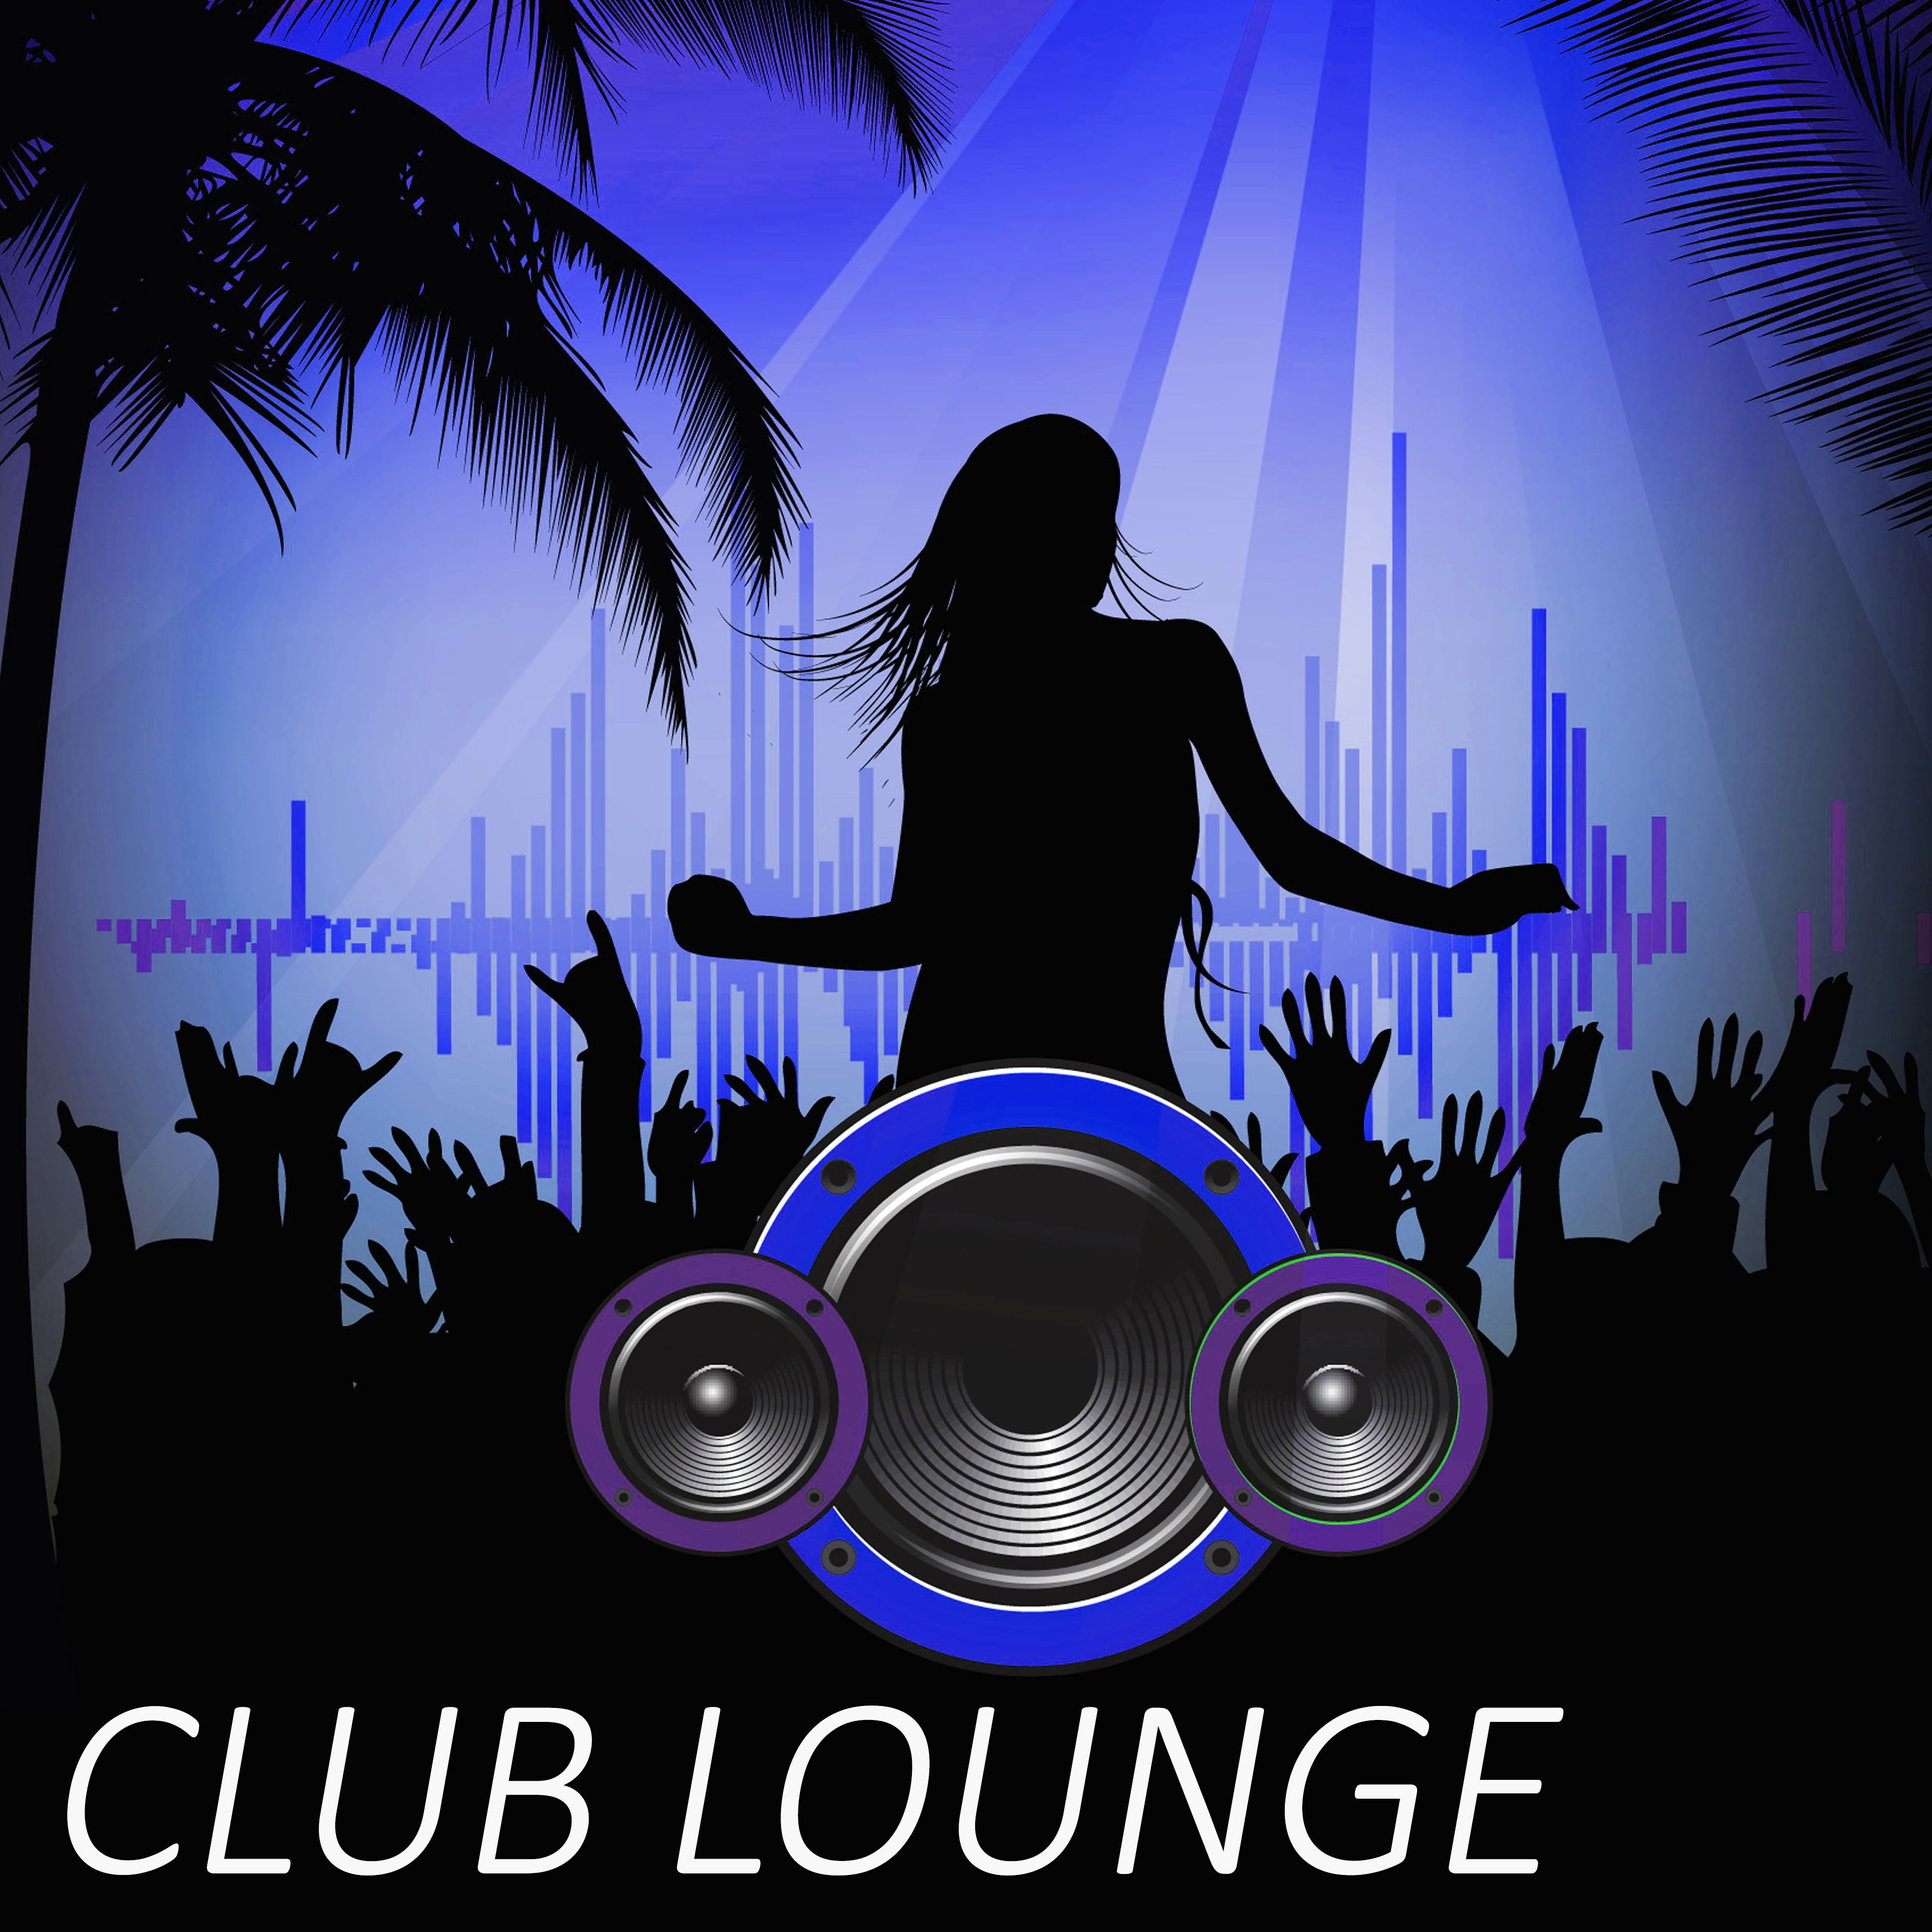 Club Lounge  Best Chill Out Club, Lounged Out